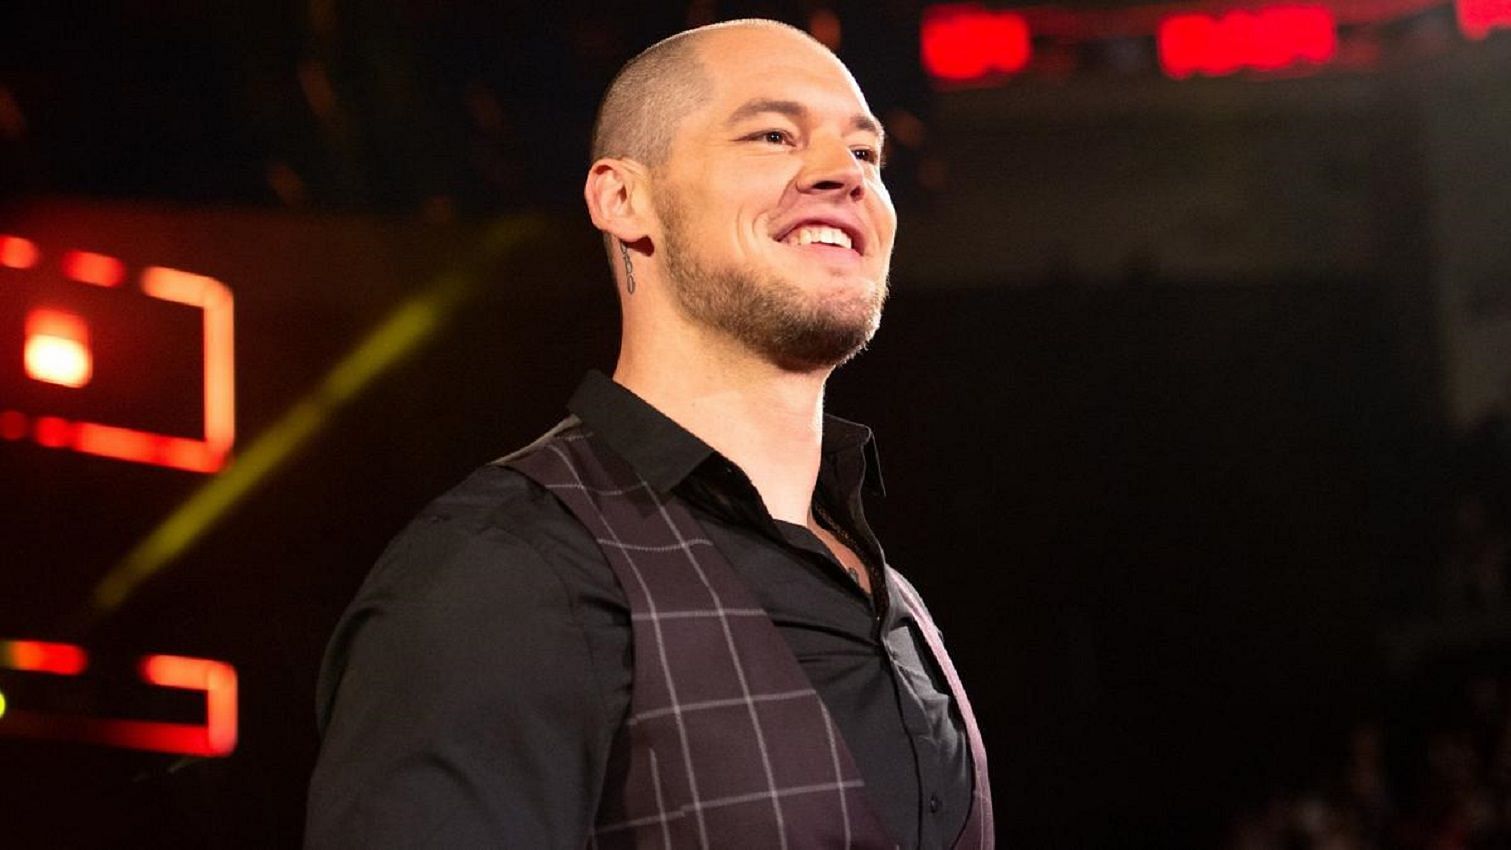 Corbin has been primarily on SmackDown for the last couple of years